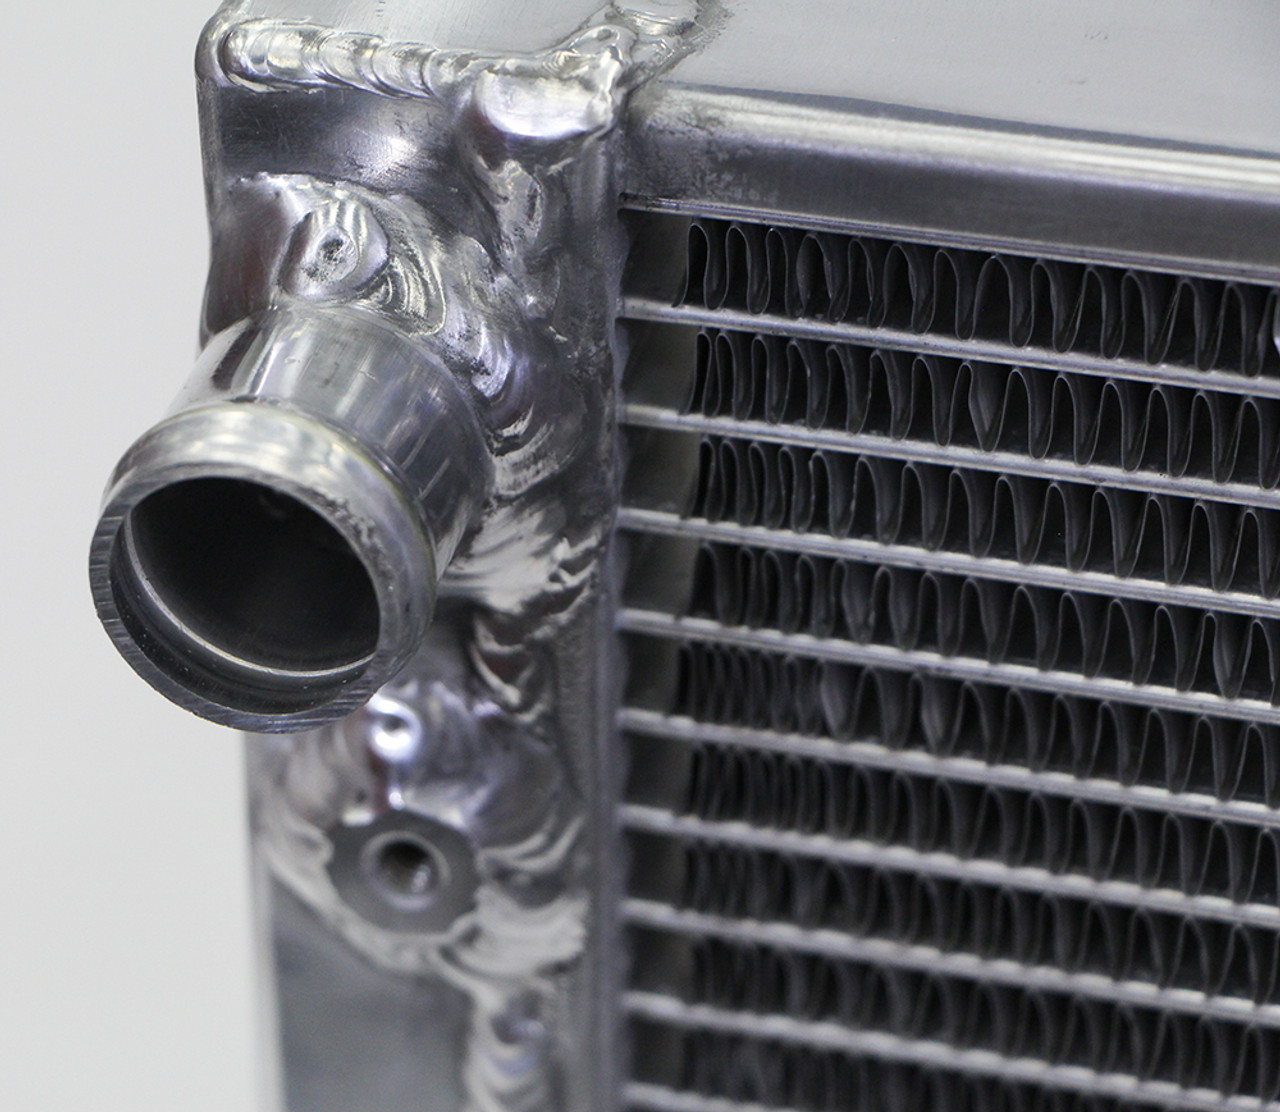 24817) New High Performance Radiator for Polaris Ranger 570, 900, 1000  13-18 - 1240664 - American Cooling Solutions